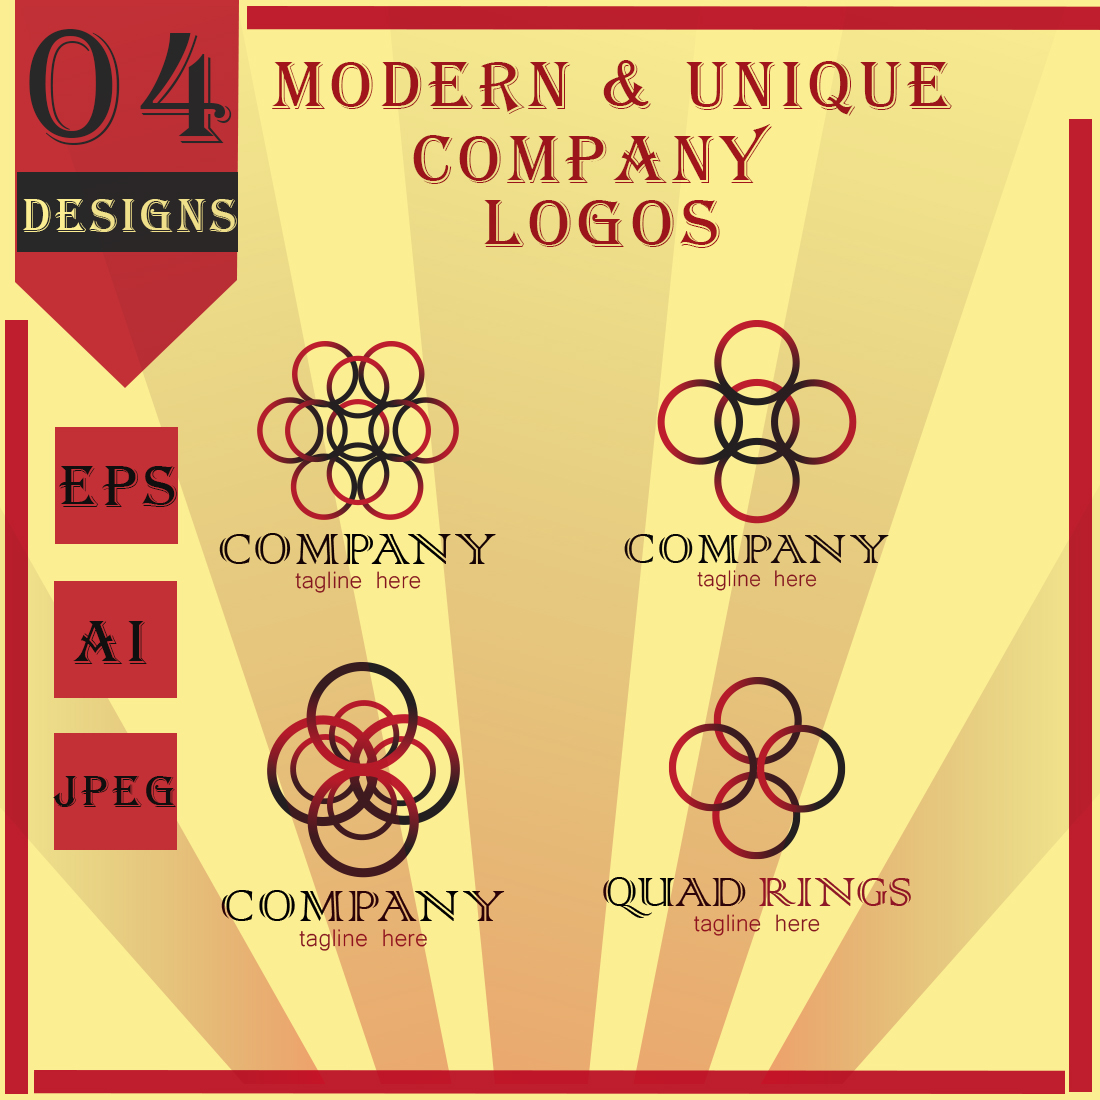 Modern & Unique Company Logos (4 Designs) with Black & White version of Logos preview image.